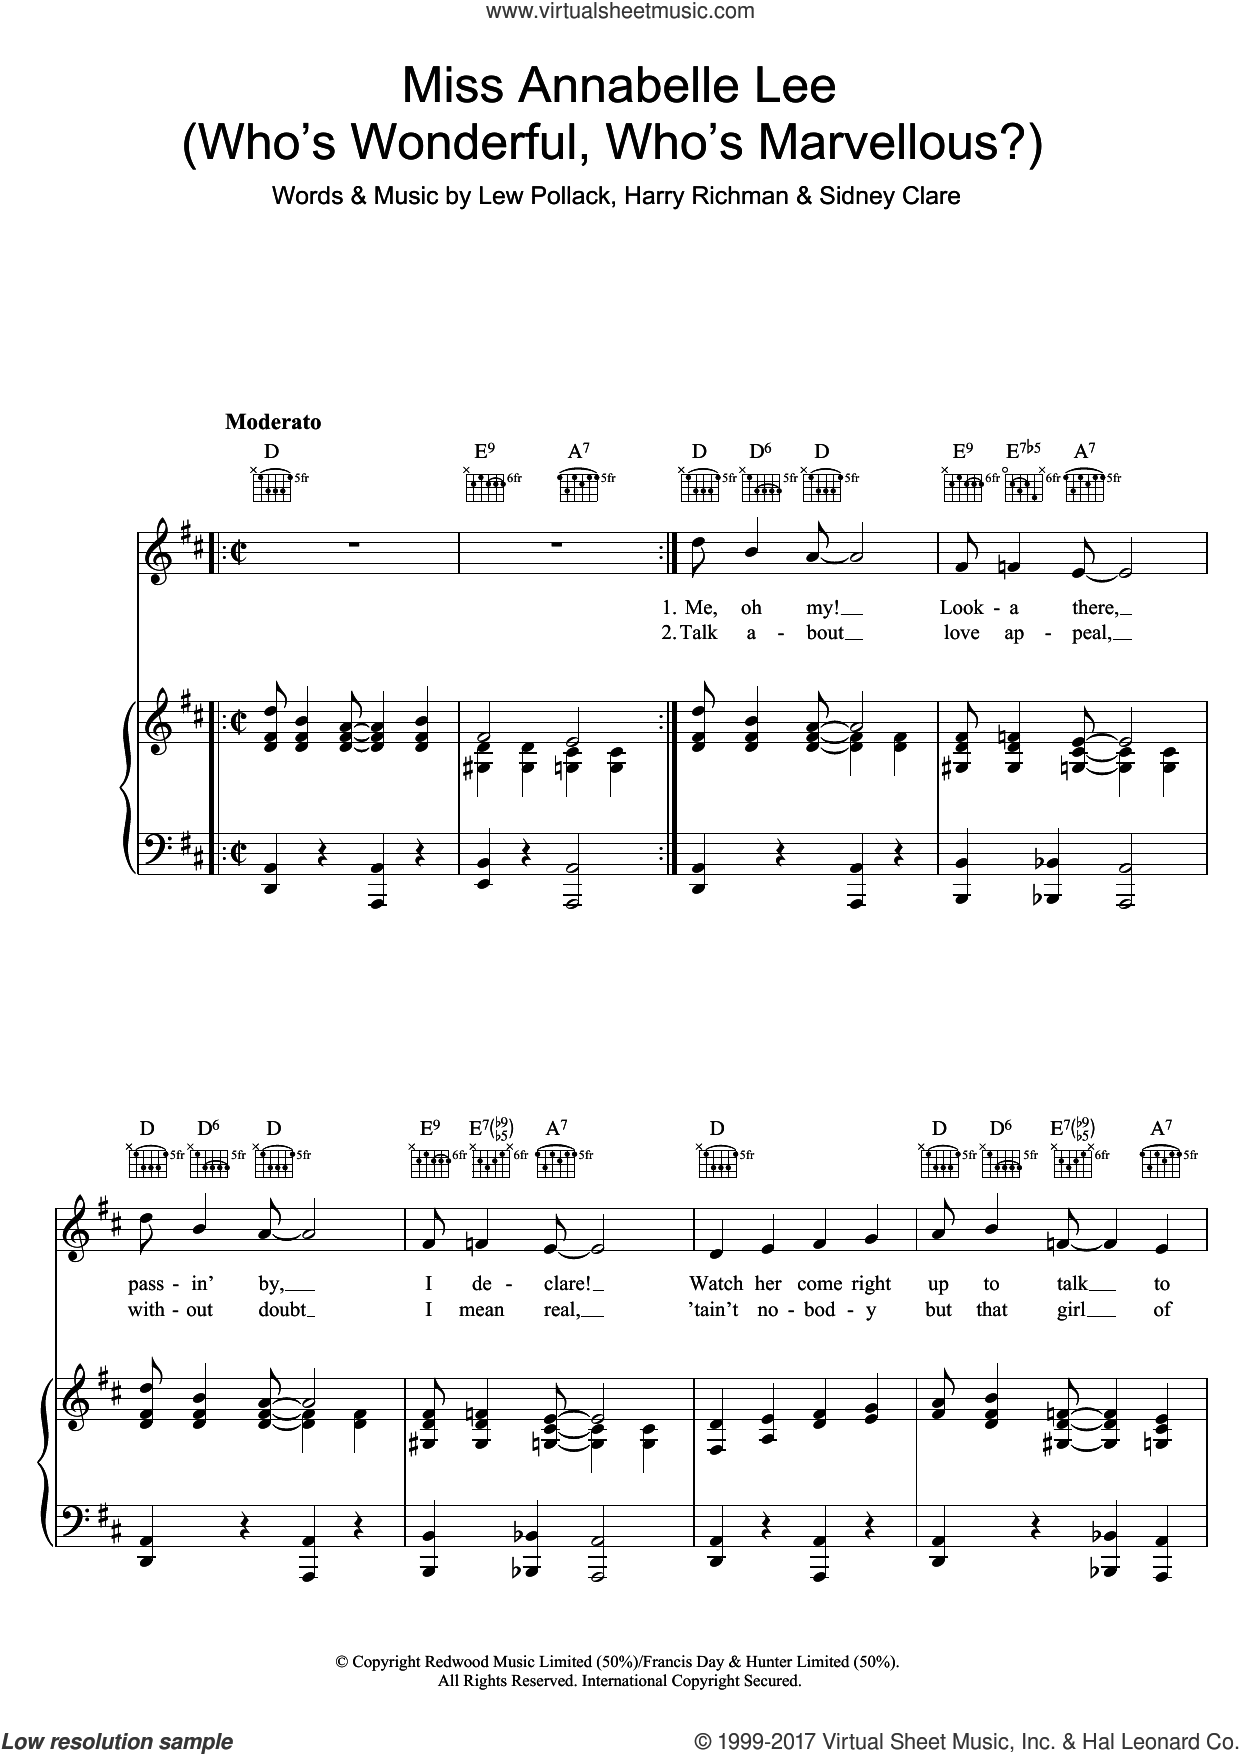 Miss Annabelle Lee (Who's Wonderful, Who's Marvellous?) sheet music for  voice, piano or guitar